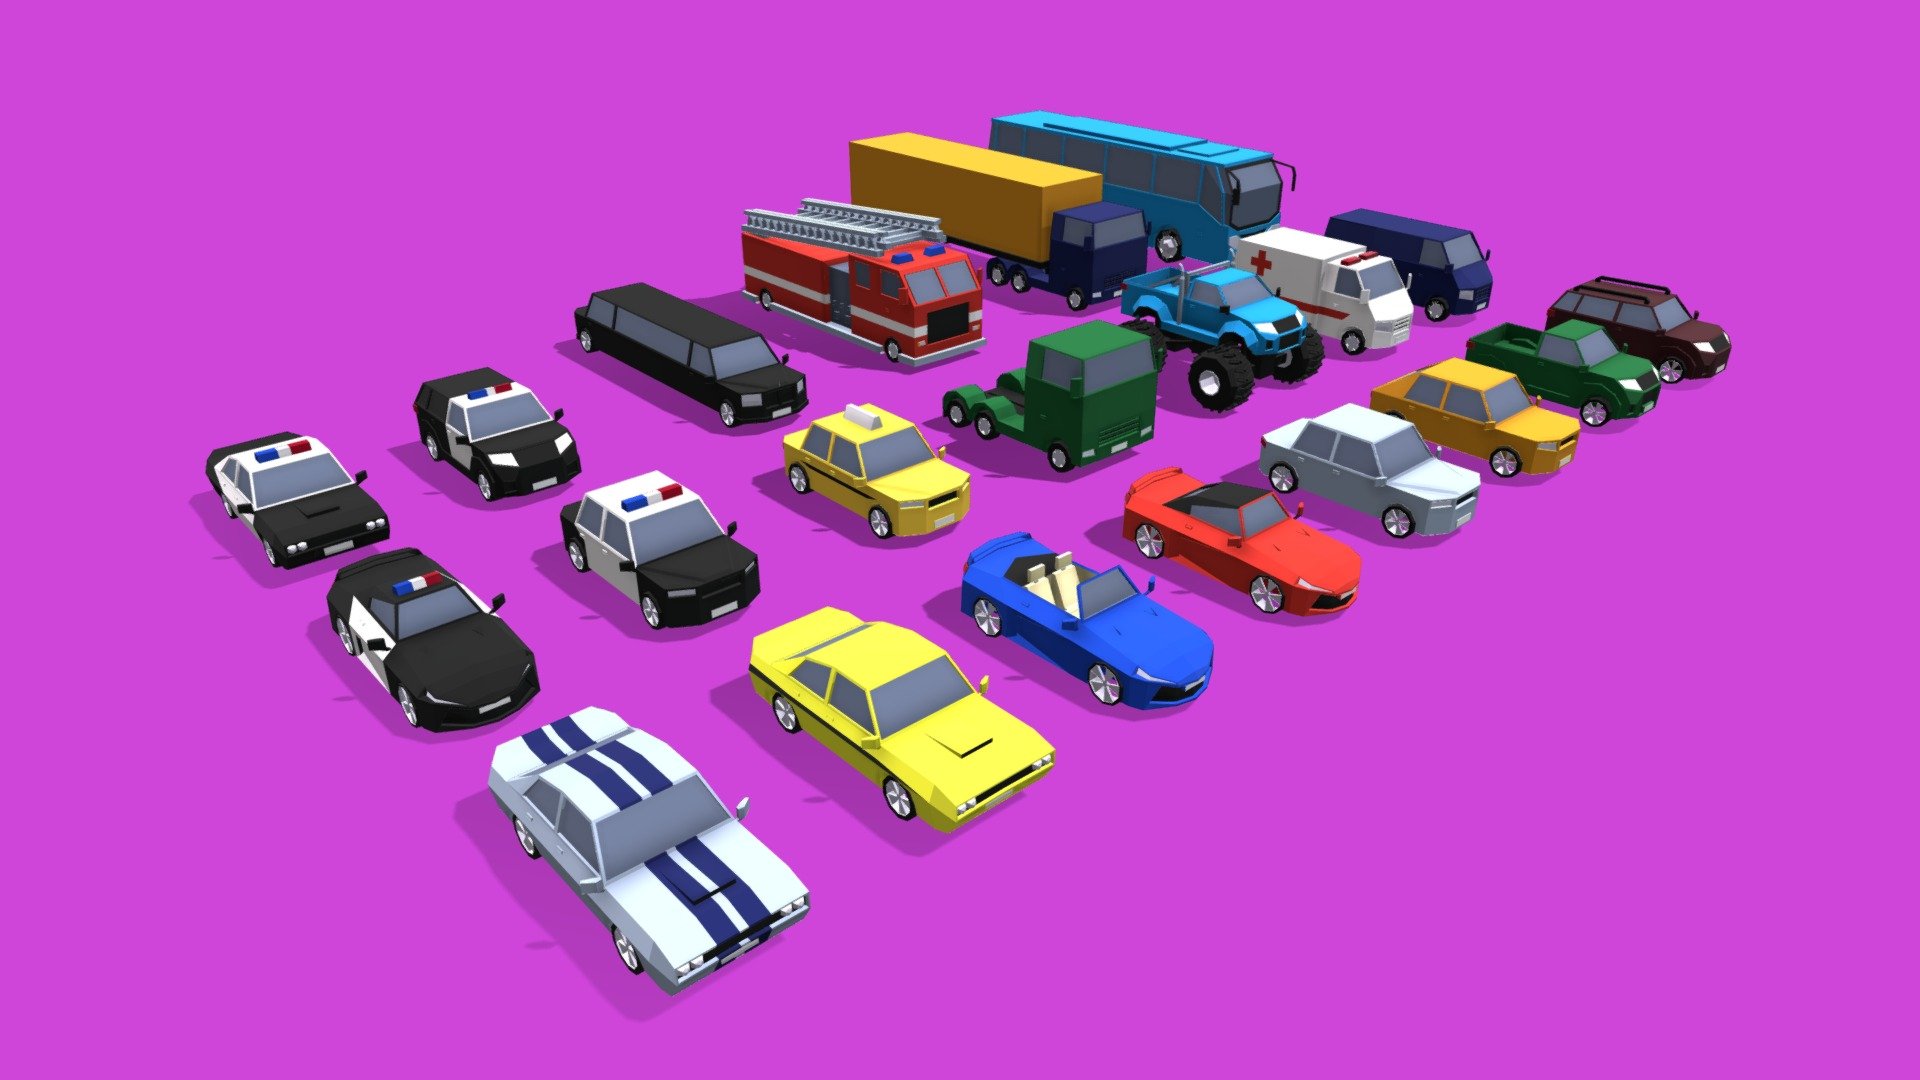 A free low poly game ready vehicles pack with separated wheels to use on your 3D games.

The colors are separated by materials, so yon can create new car colors easily.

Vehicles included:




4 Police cars (Sedan, Sports, Muscle, SUV)

2 Muscle

1 Sports

1 Roadster

1 Sedan

1 Hatchback

1 Pickup

1 SUV

1 Van

1 Ambulance

1 Monster Truck (Bigfoot)

1 Taxi

1 Truck

1 Truck with trailer

1 Bus

1 Firetruck

1 Limousine

Licence is CC0.

Enjoy it! - Free Low Poly Vehicles Pack - Download Free 3D model by RgsDev 3d model